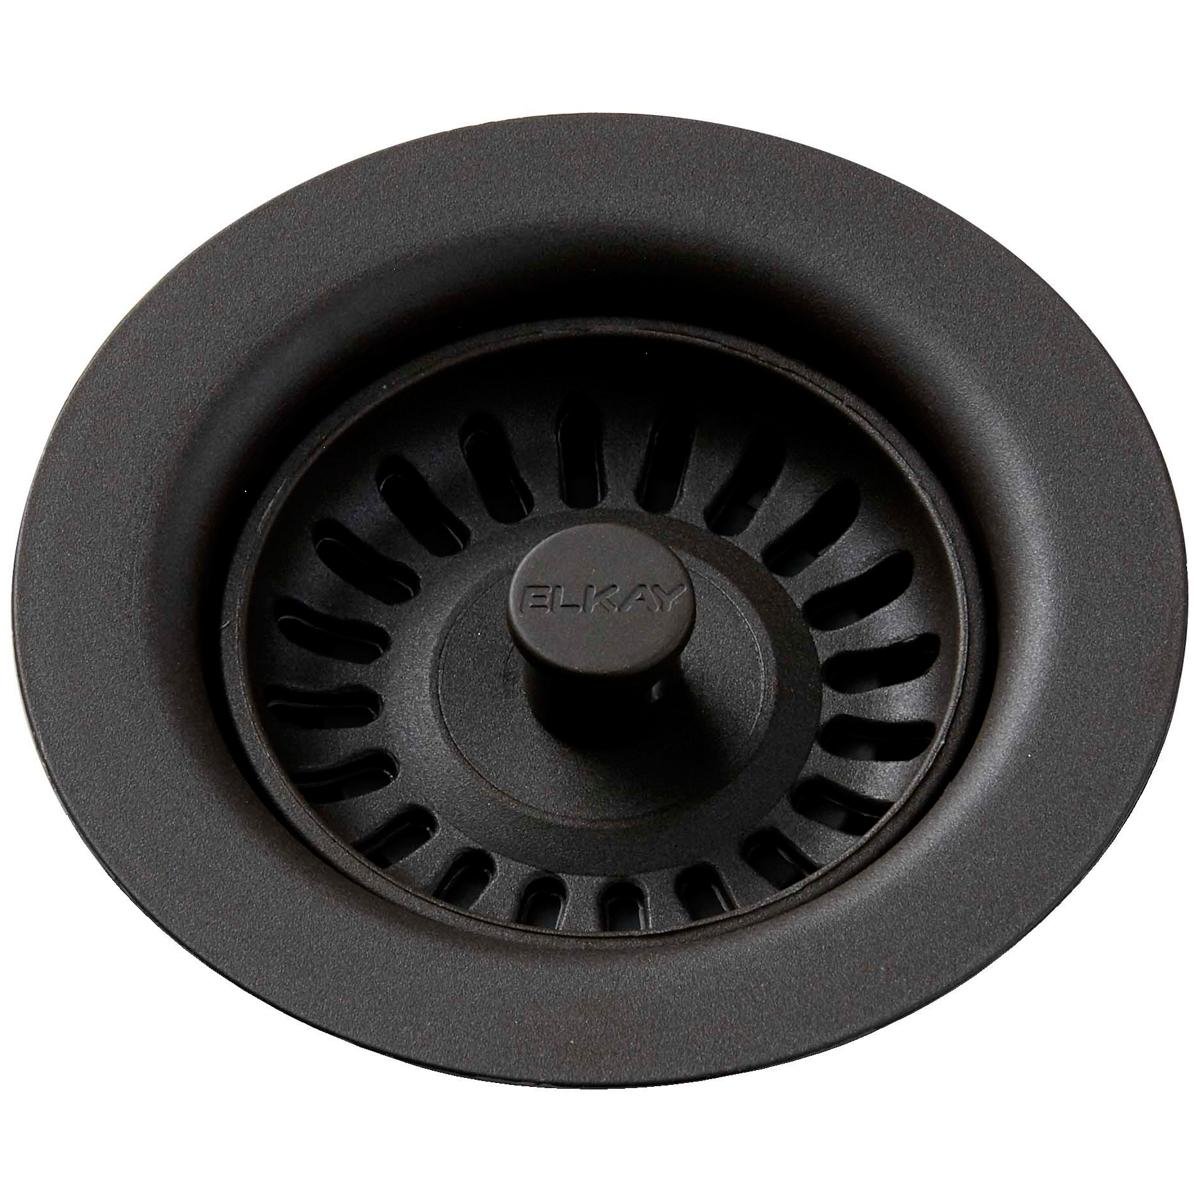 Elkay LKQS35MC Polymer Drain Fitting with Removable Basket Strainer and Rubber Stopper, Mocha